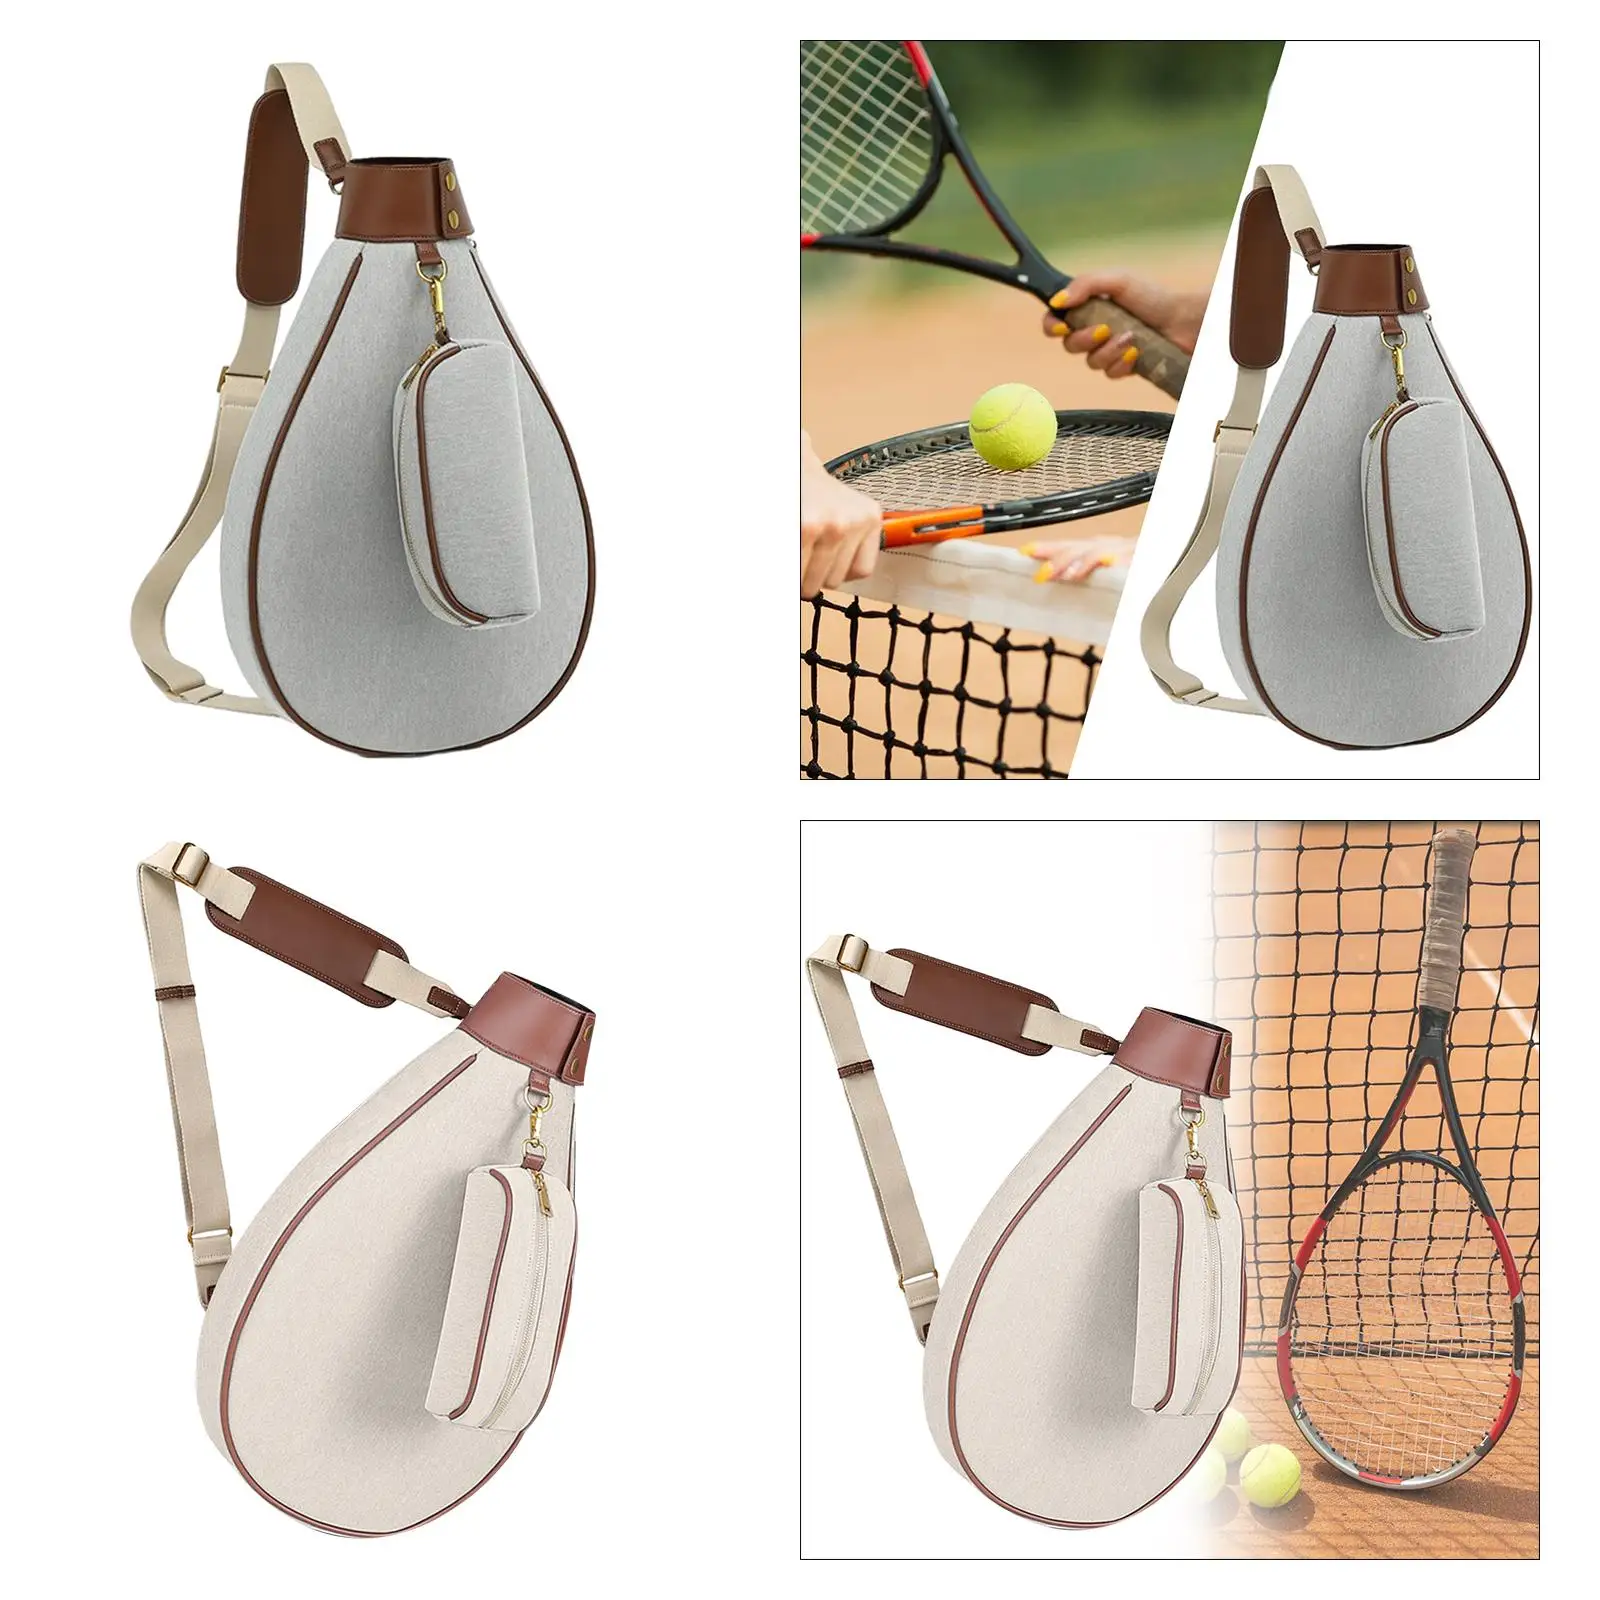 Tennis Bag for Adults Carrying Bag Adjustable Strap Racket Cover for Pickleball, Tennis, Racket Ball, and Travel